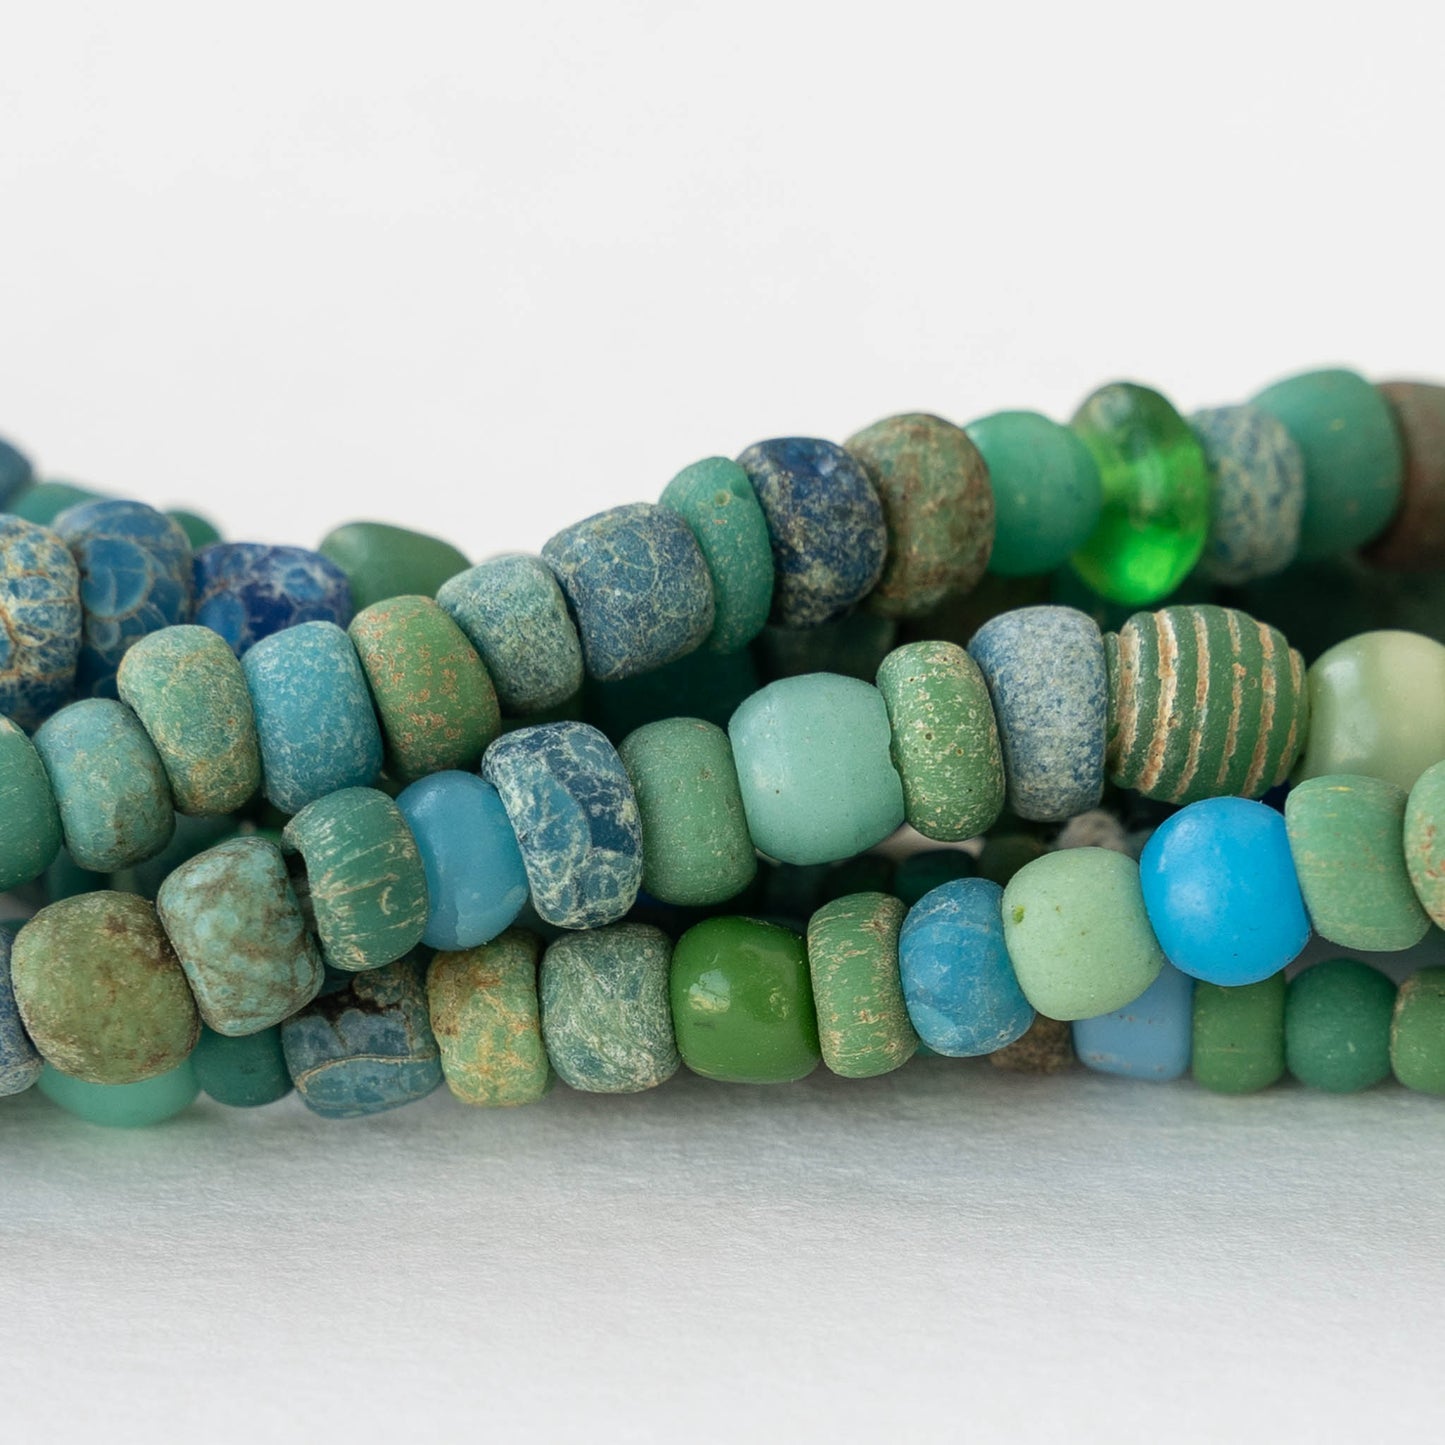 Ancient Djenne Glass Trade Beads - Turquoise Greens - 24 inch Strands